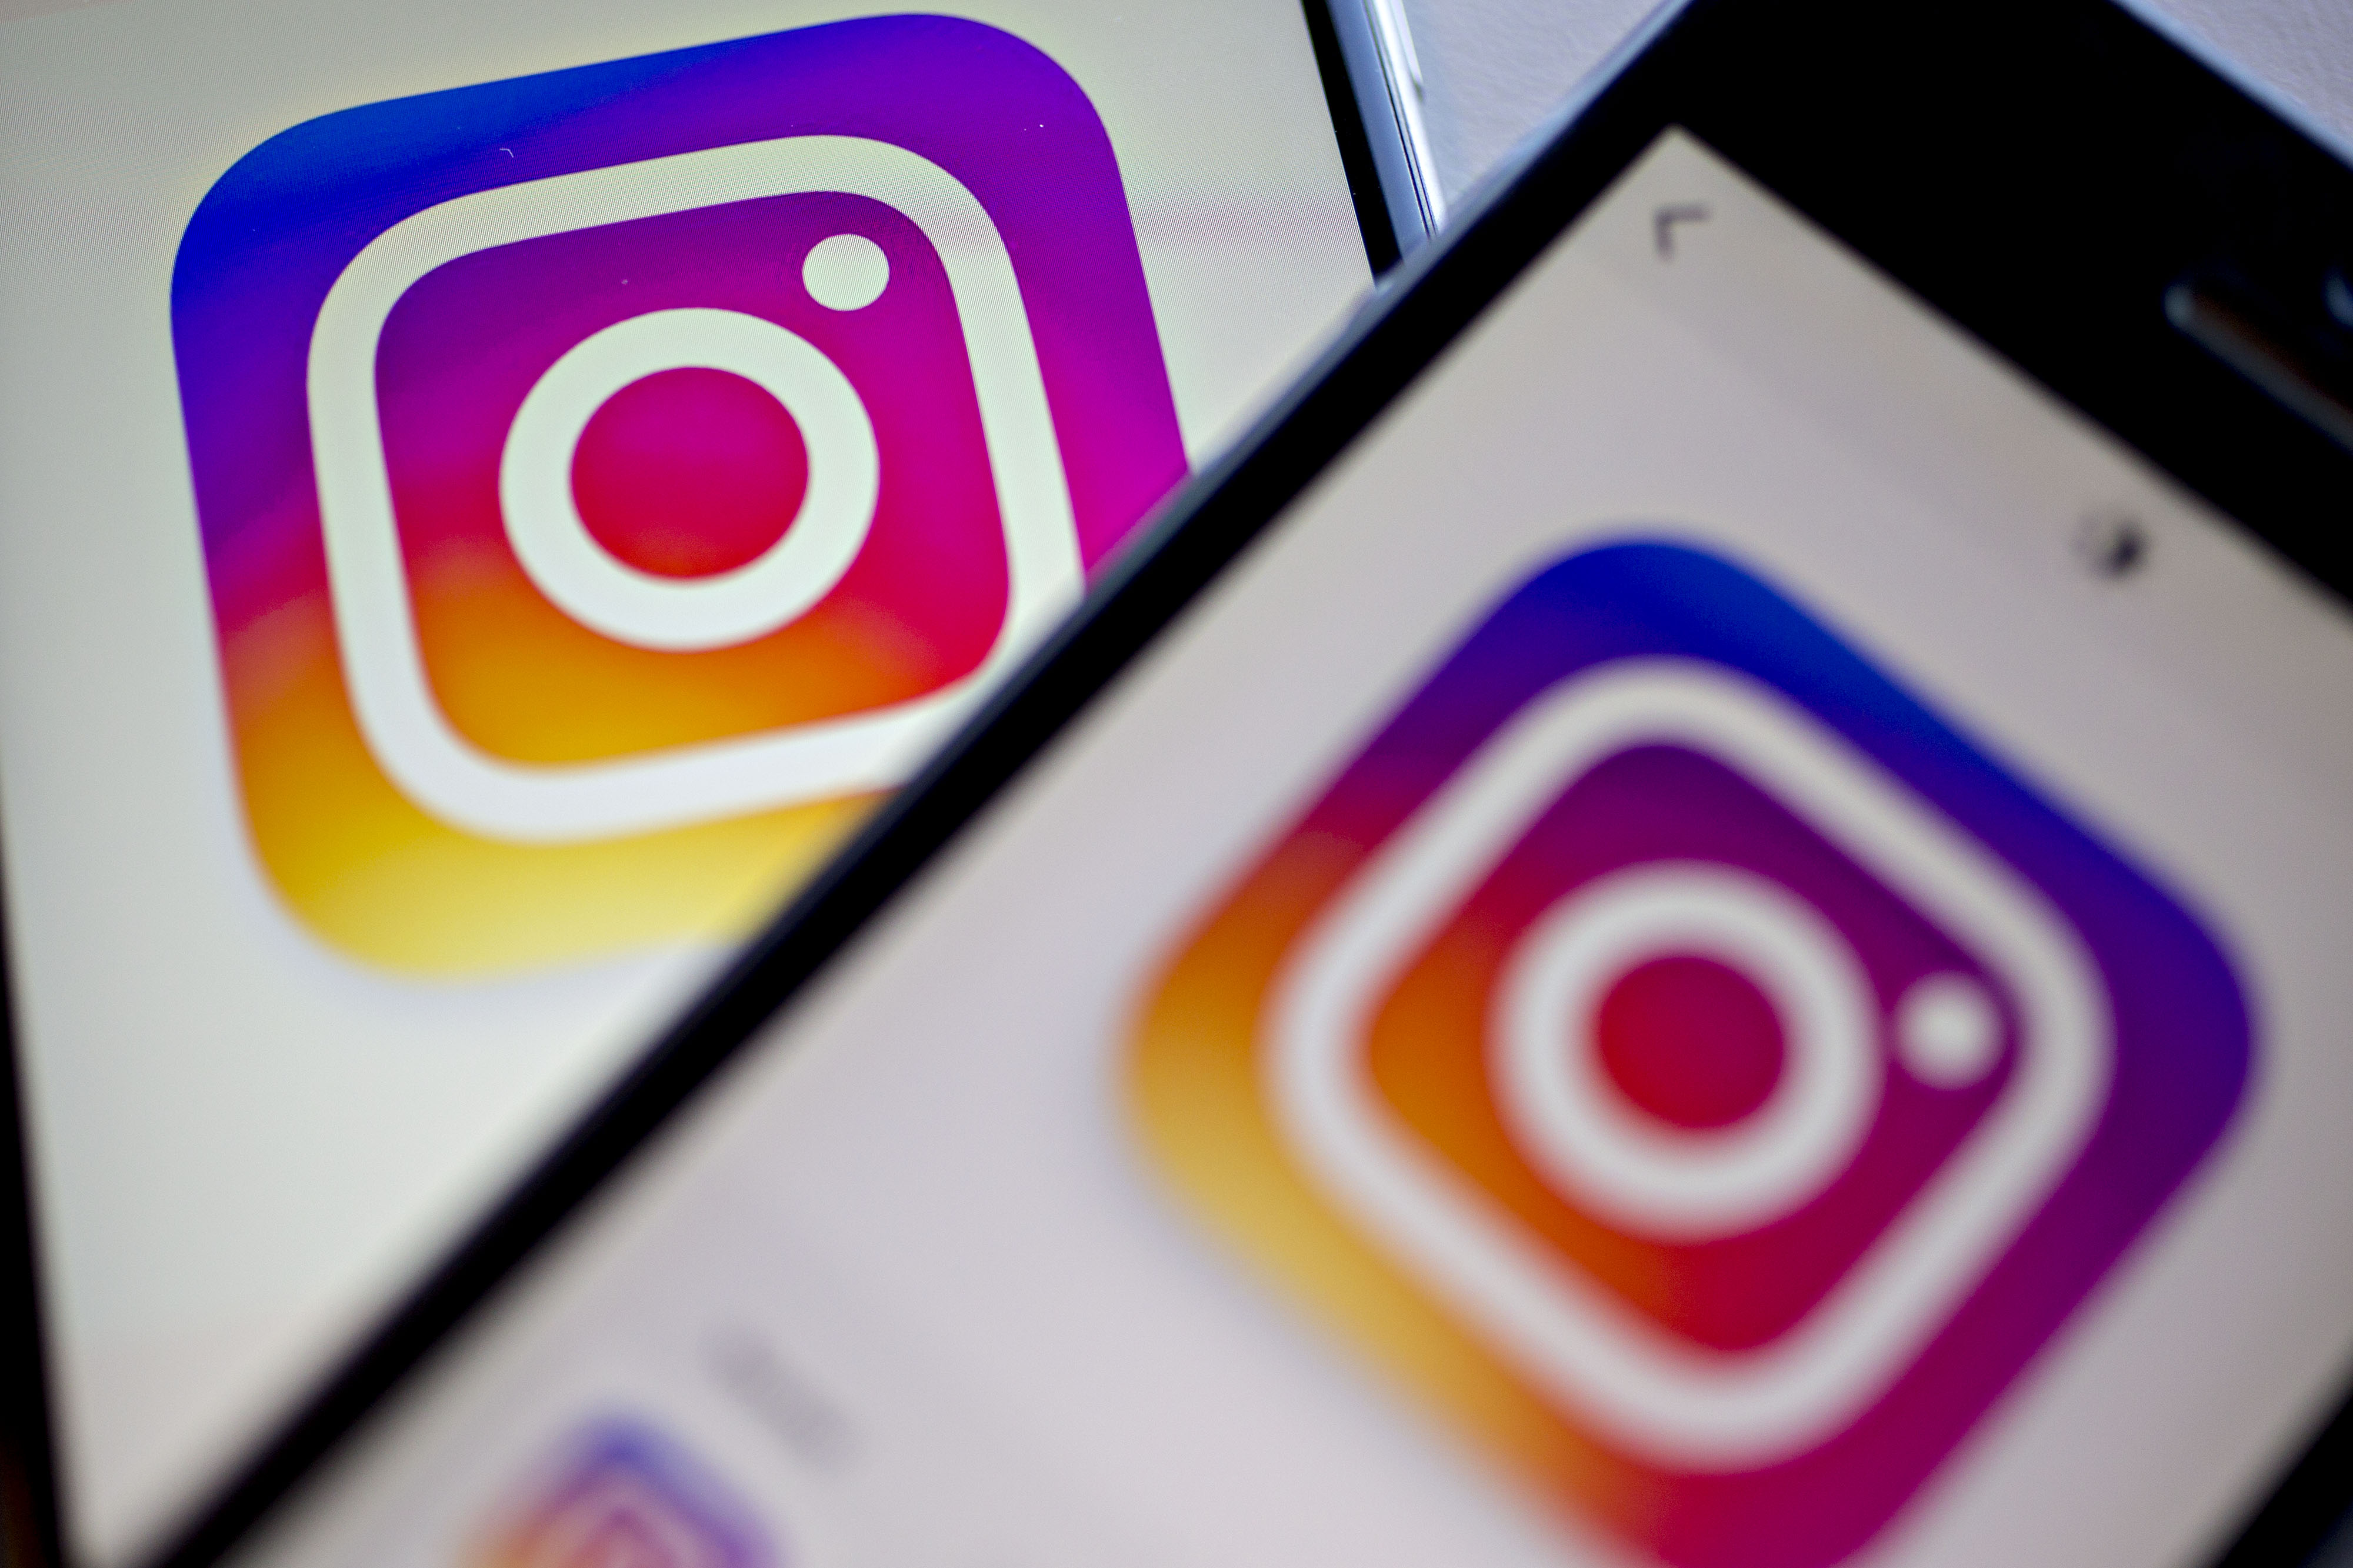 Facebook Inc.'s Instagram logo is displayed on the Instagram application on an Apple Inc. iPhone in this arranged photograph taken in Washington, D.C., U.S., on June 17. (Bloomberg&mdash;Bloomberg via Getty Images)